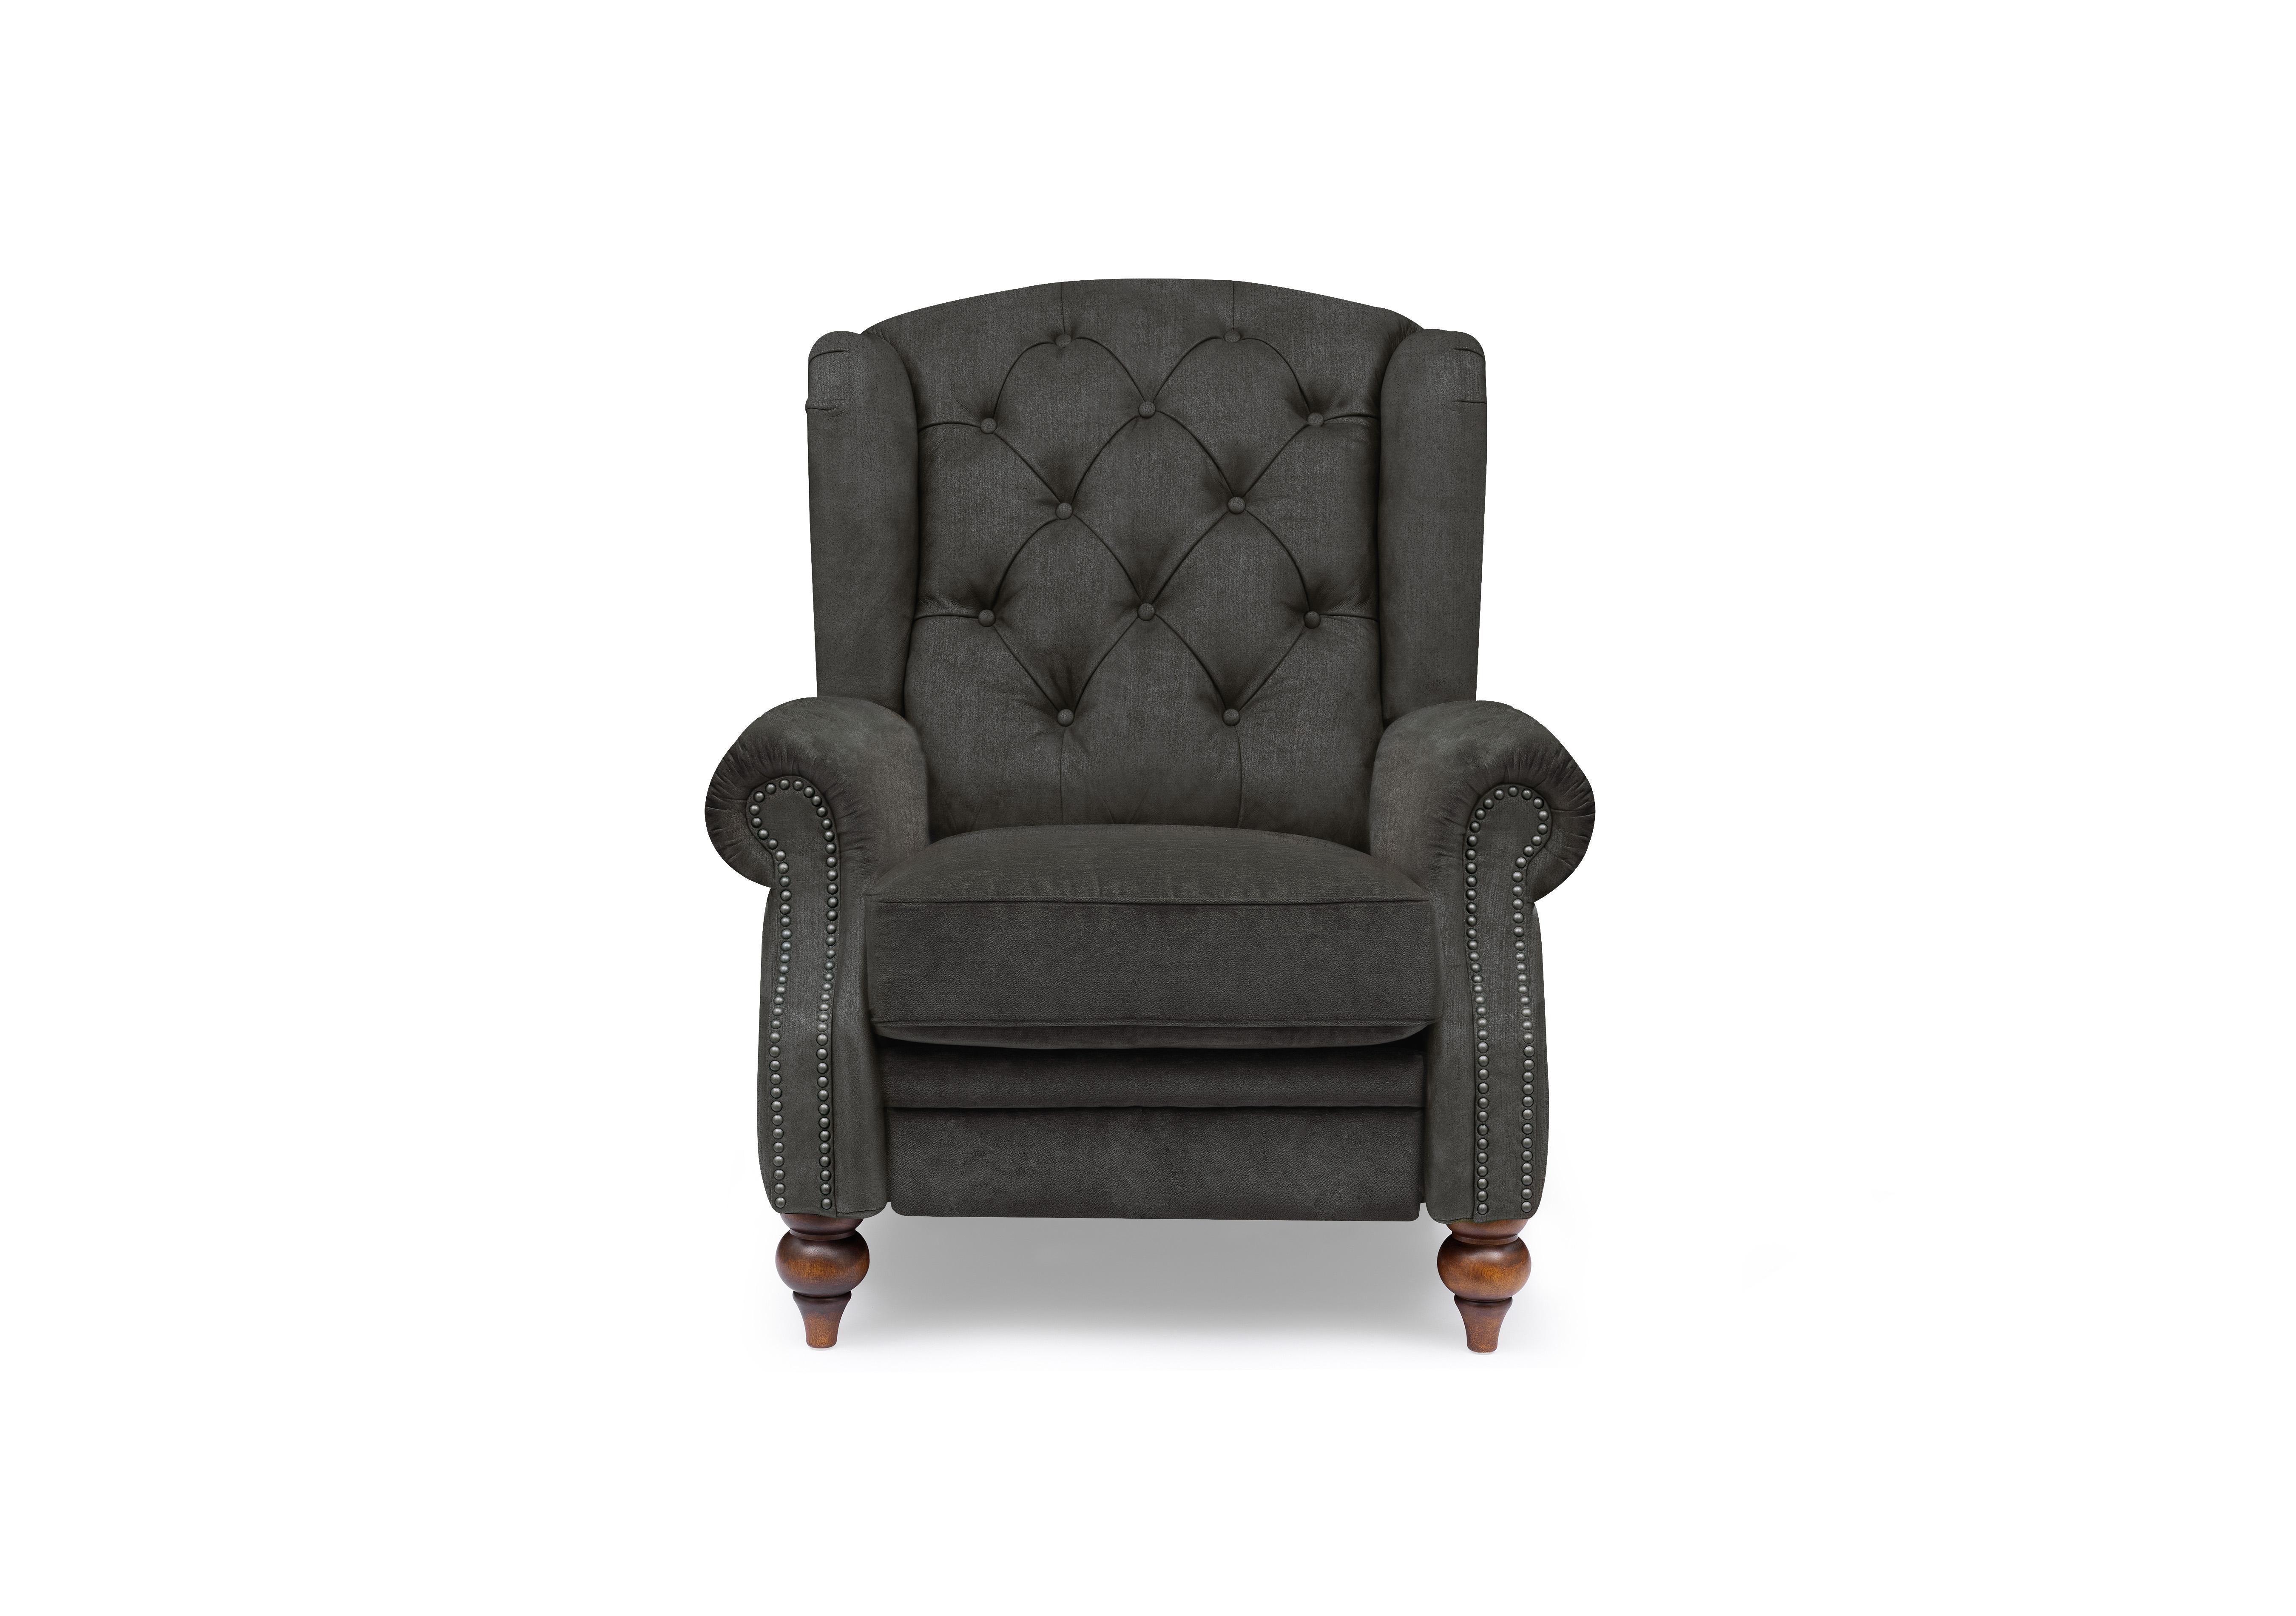 Shackleton Fabric Power Recliner Wing Chair in X3y2-W021 Moonstone on Furniture Village